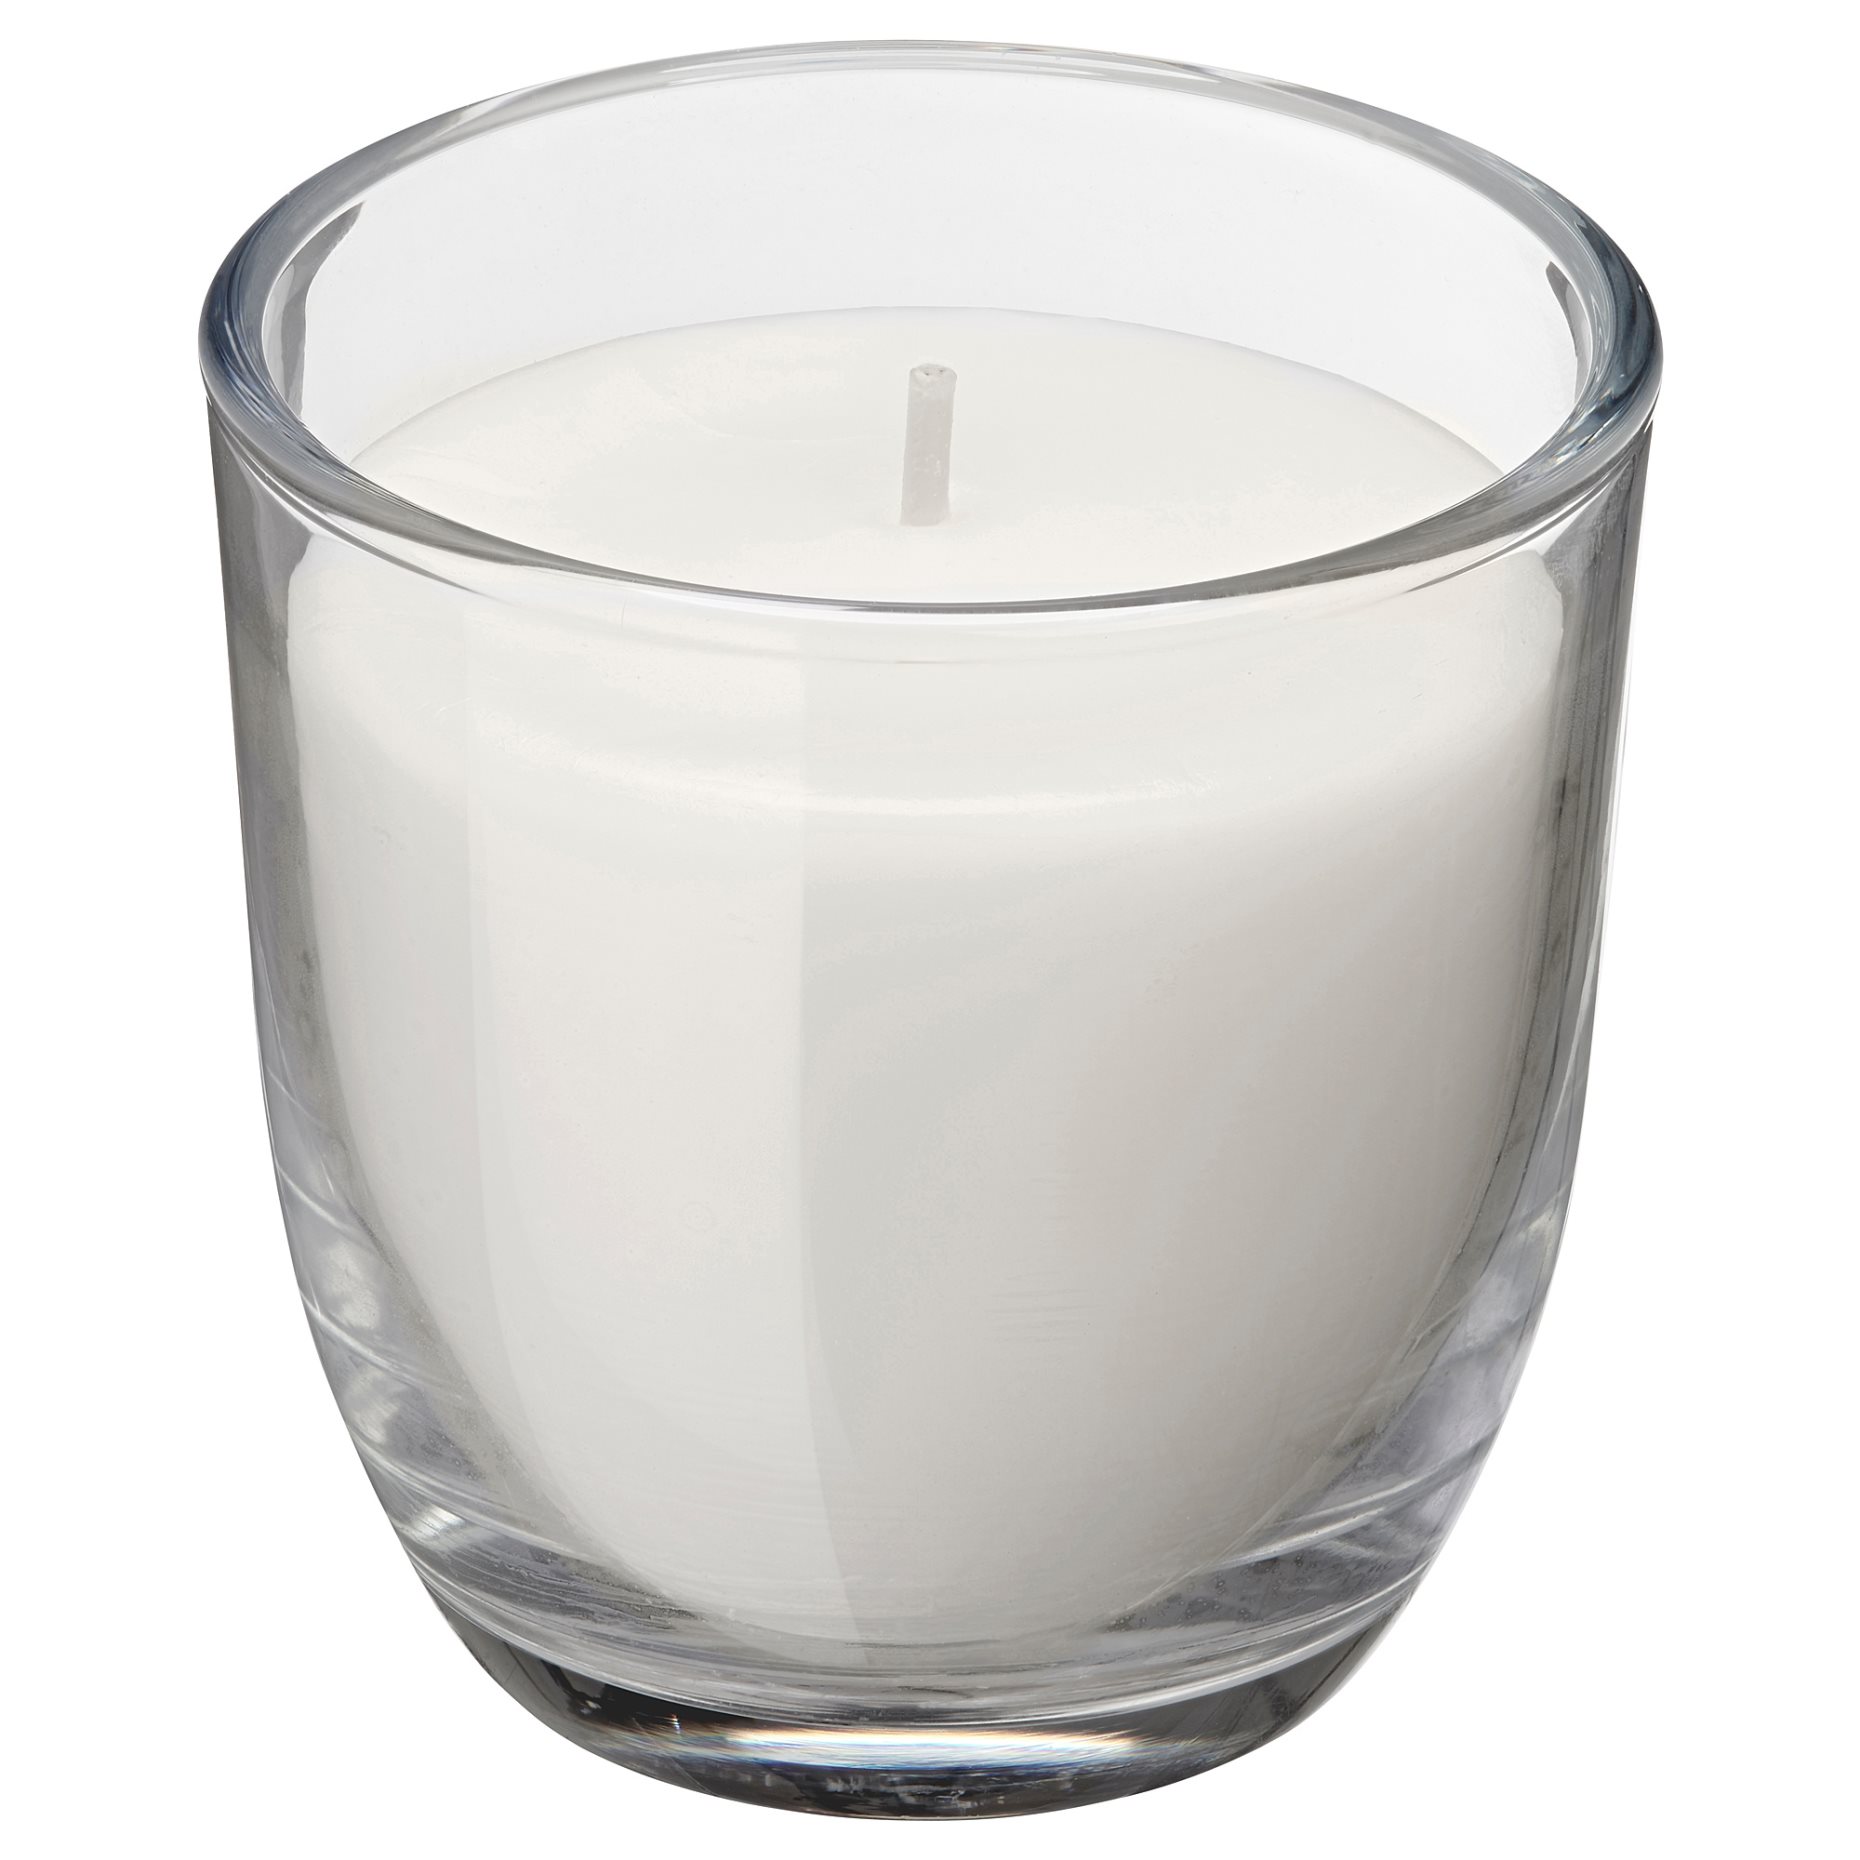 JUBLA, unscented candle in glass, 7.5 cm, 205.068.57